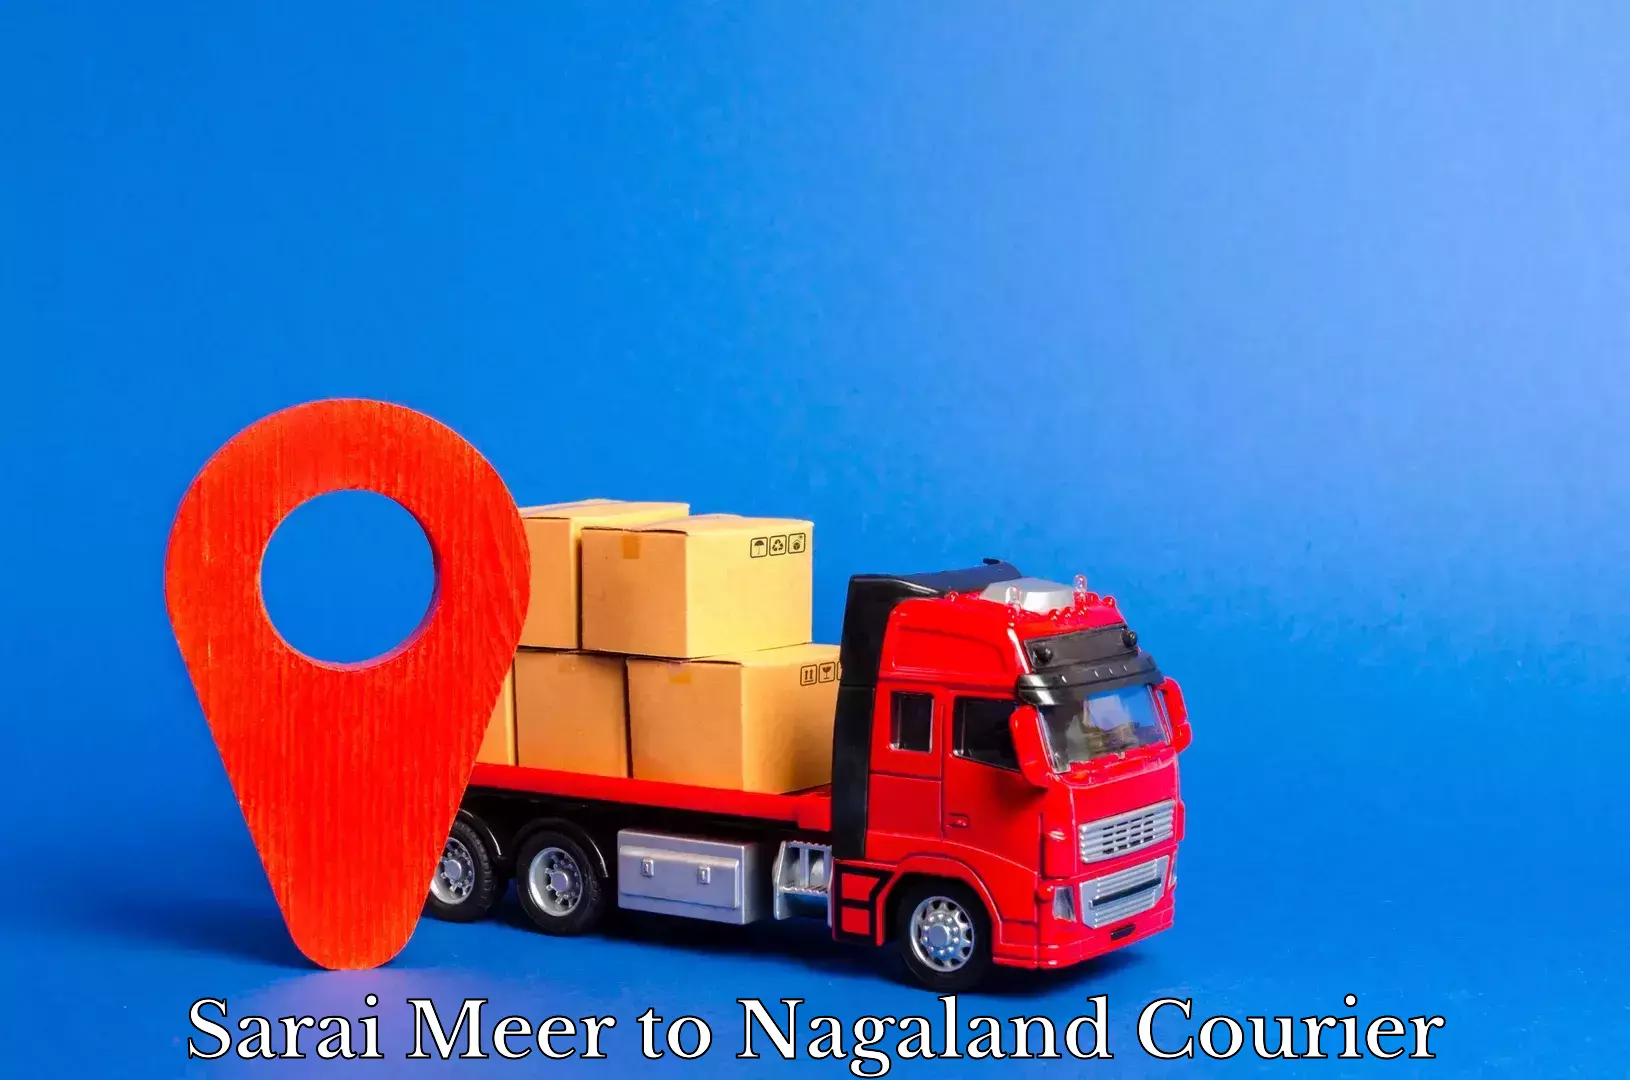 User-friendly delivery service Sarai Meer to Nagaland